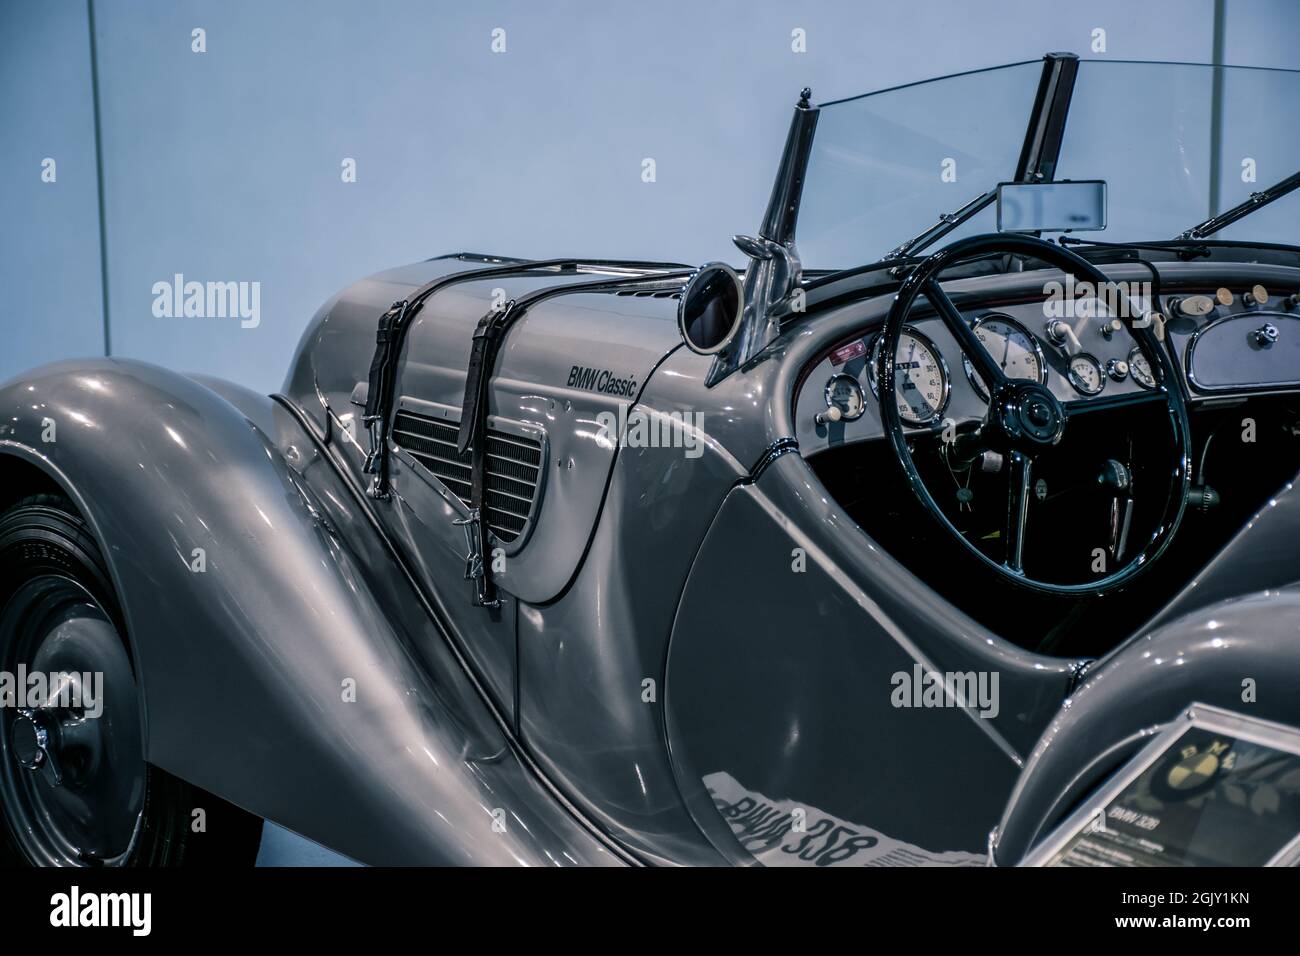 Munich/ Germany - May, 24 2019: BMW 328 classic German 1930s sport roadster  in BMW Museum/ BMW Welt Stock Photo